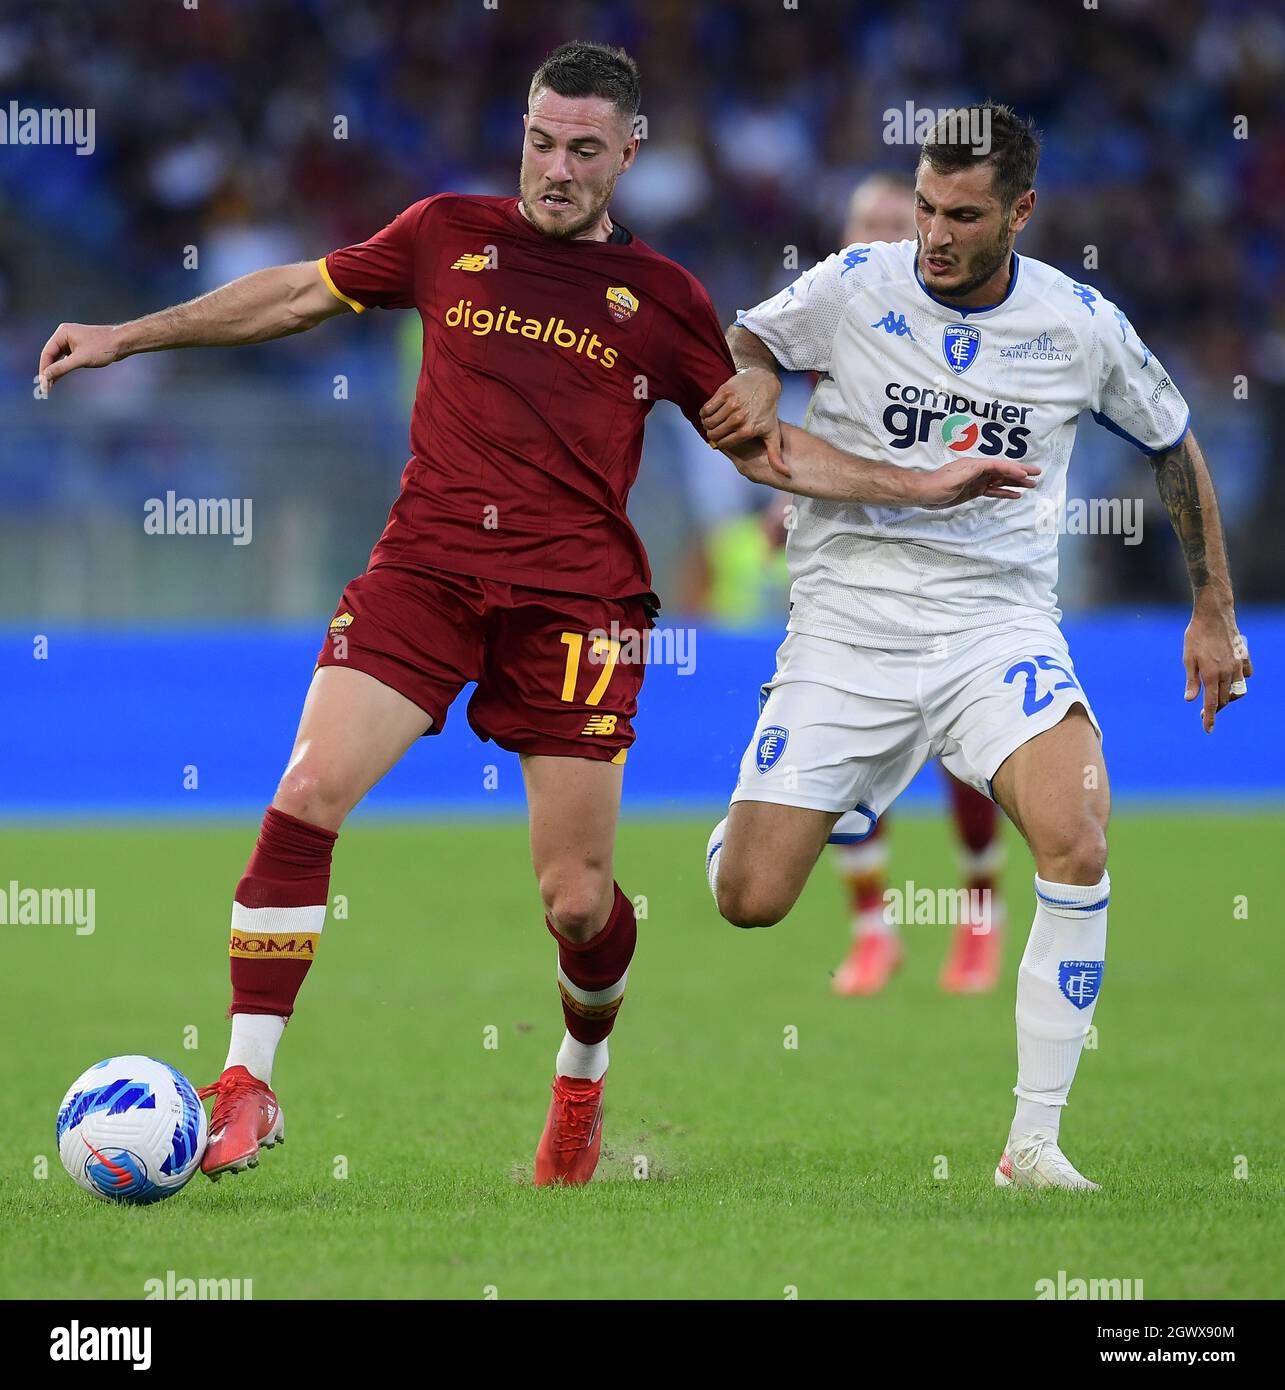 Rome, Italy. 3rd Oct, 2021. Roma's Jordan Veretout (L) vies with Empoli's Filippo Bandinelli during a Serie A football match between Roma and Empoli in Rome, Italy, Oct. 3, 2021. Credit: Augusto Casasoli/Xinhua/Alamy Live News Stock Photo